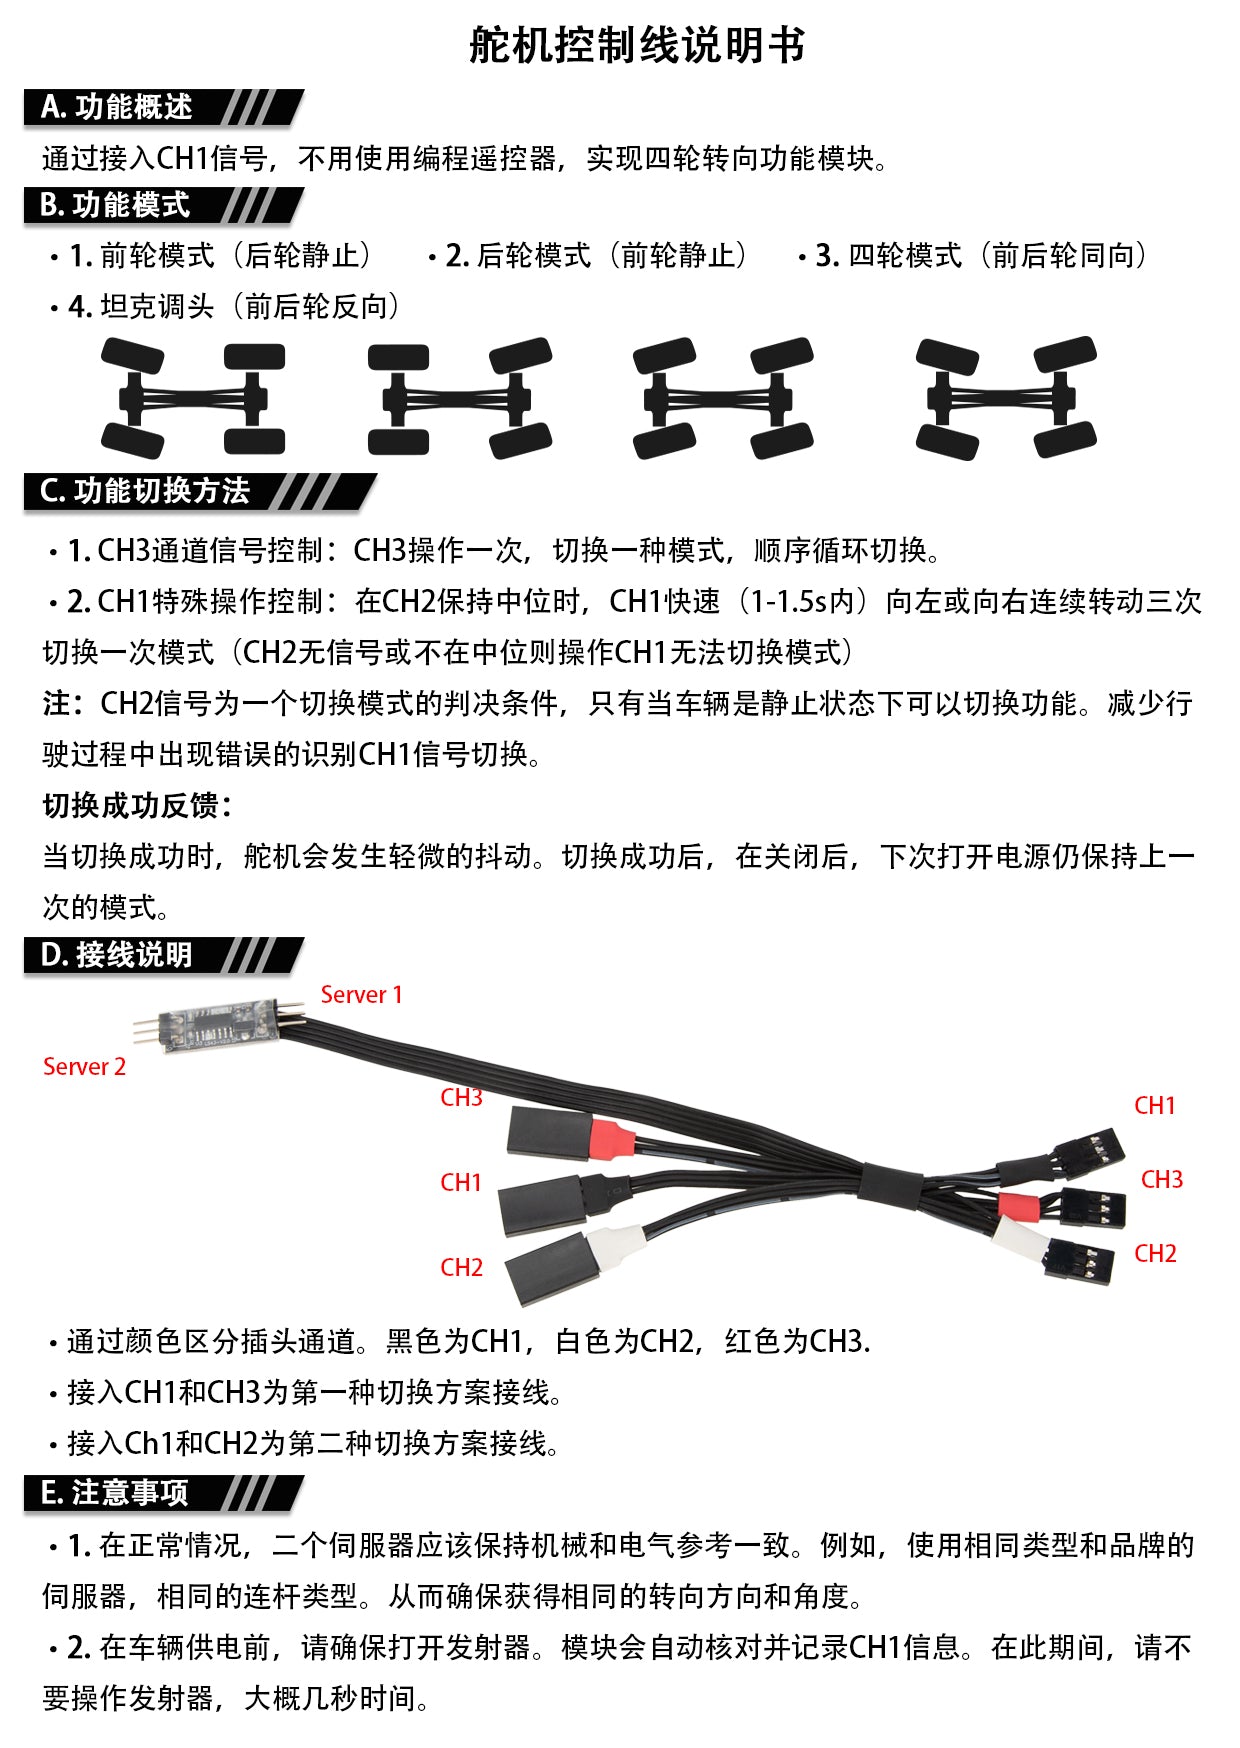 Four-wheel steering control cable for TRX4M